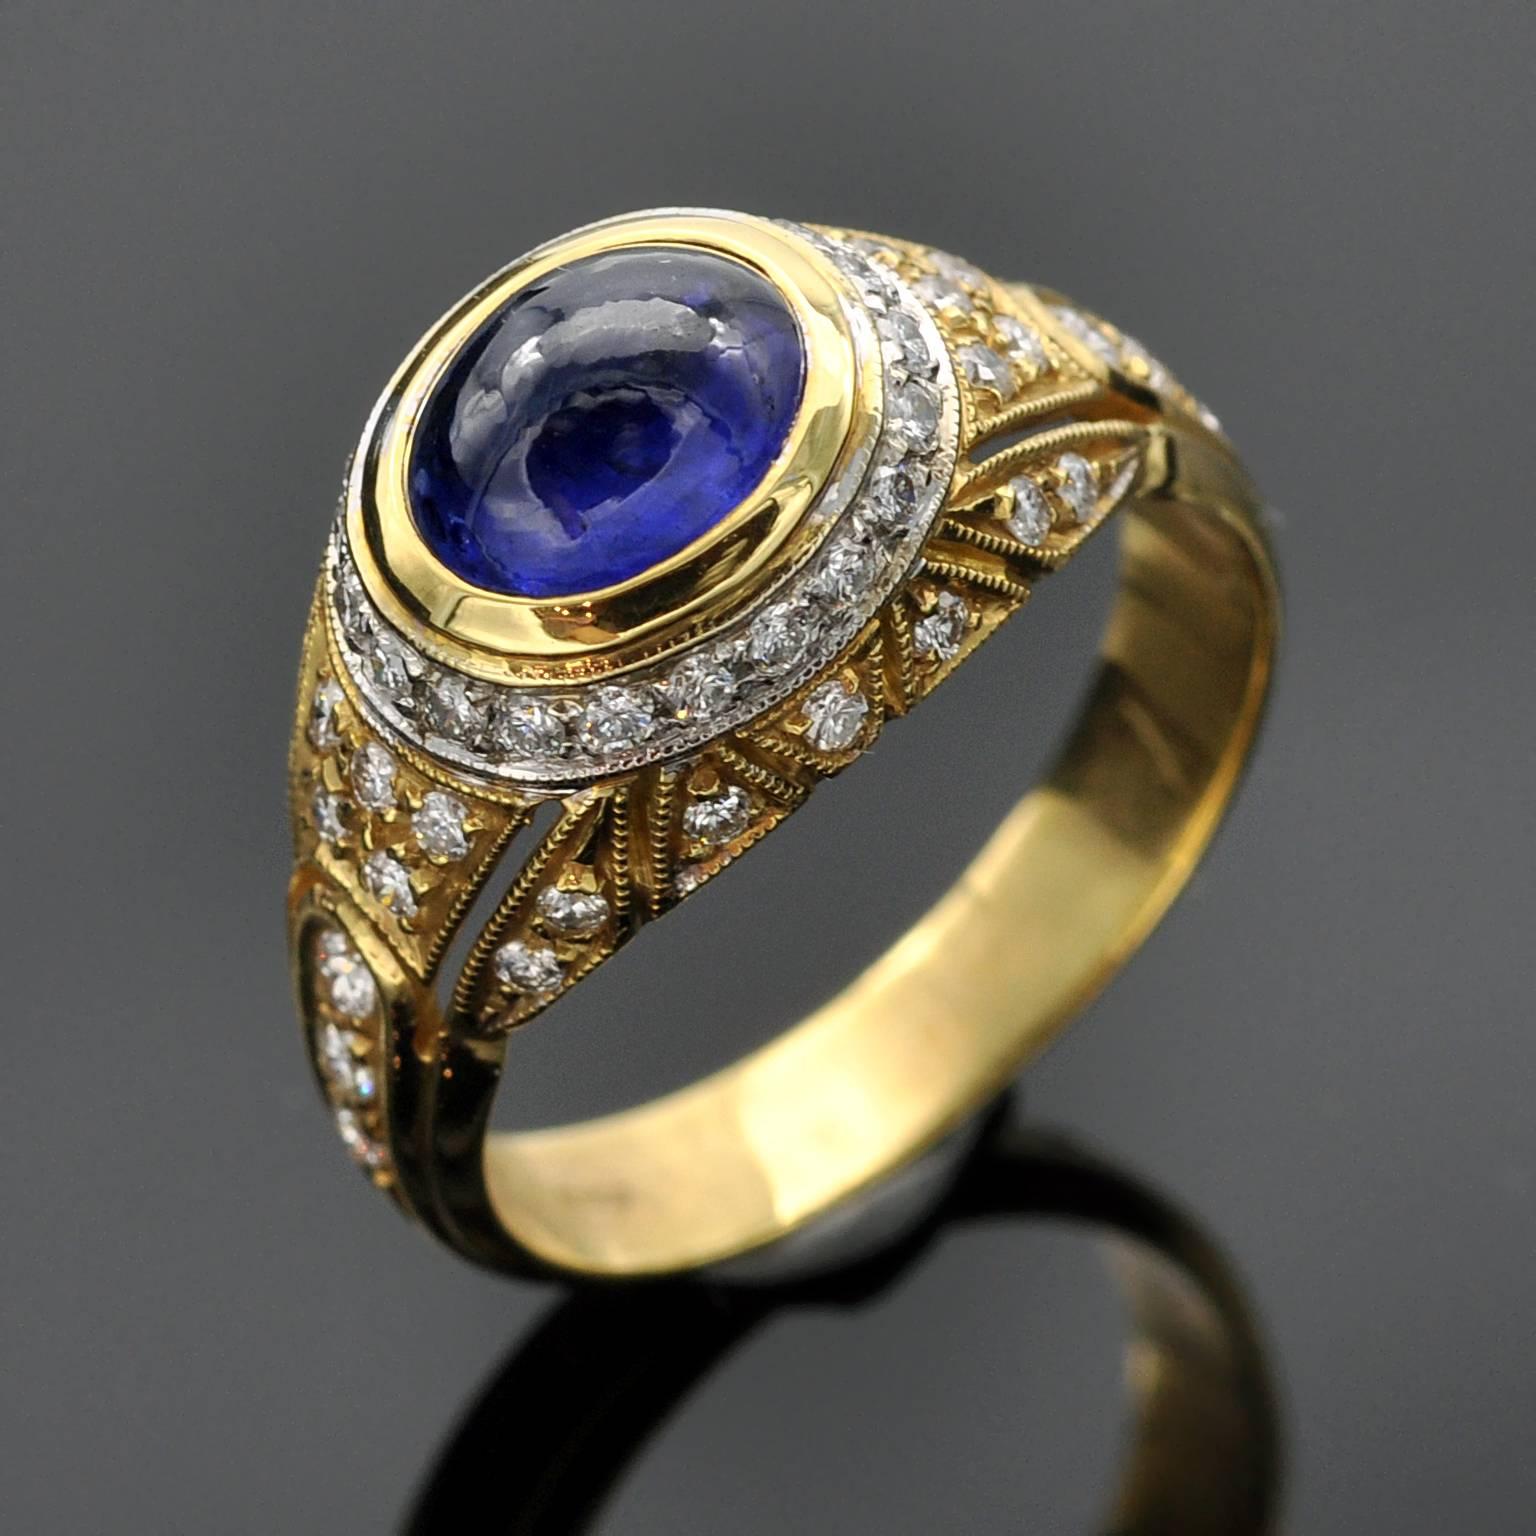 Stunning bi-color domed ring. in its center a shiny blue cabochon sapphire. Millegrain setting and chiseled work give the ring a refined touch.

Sapphire ± 2 carat
diamonds : 0.50 carat